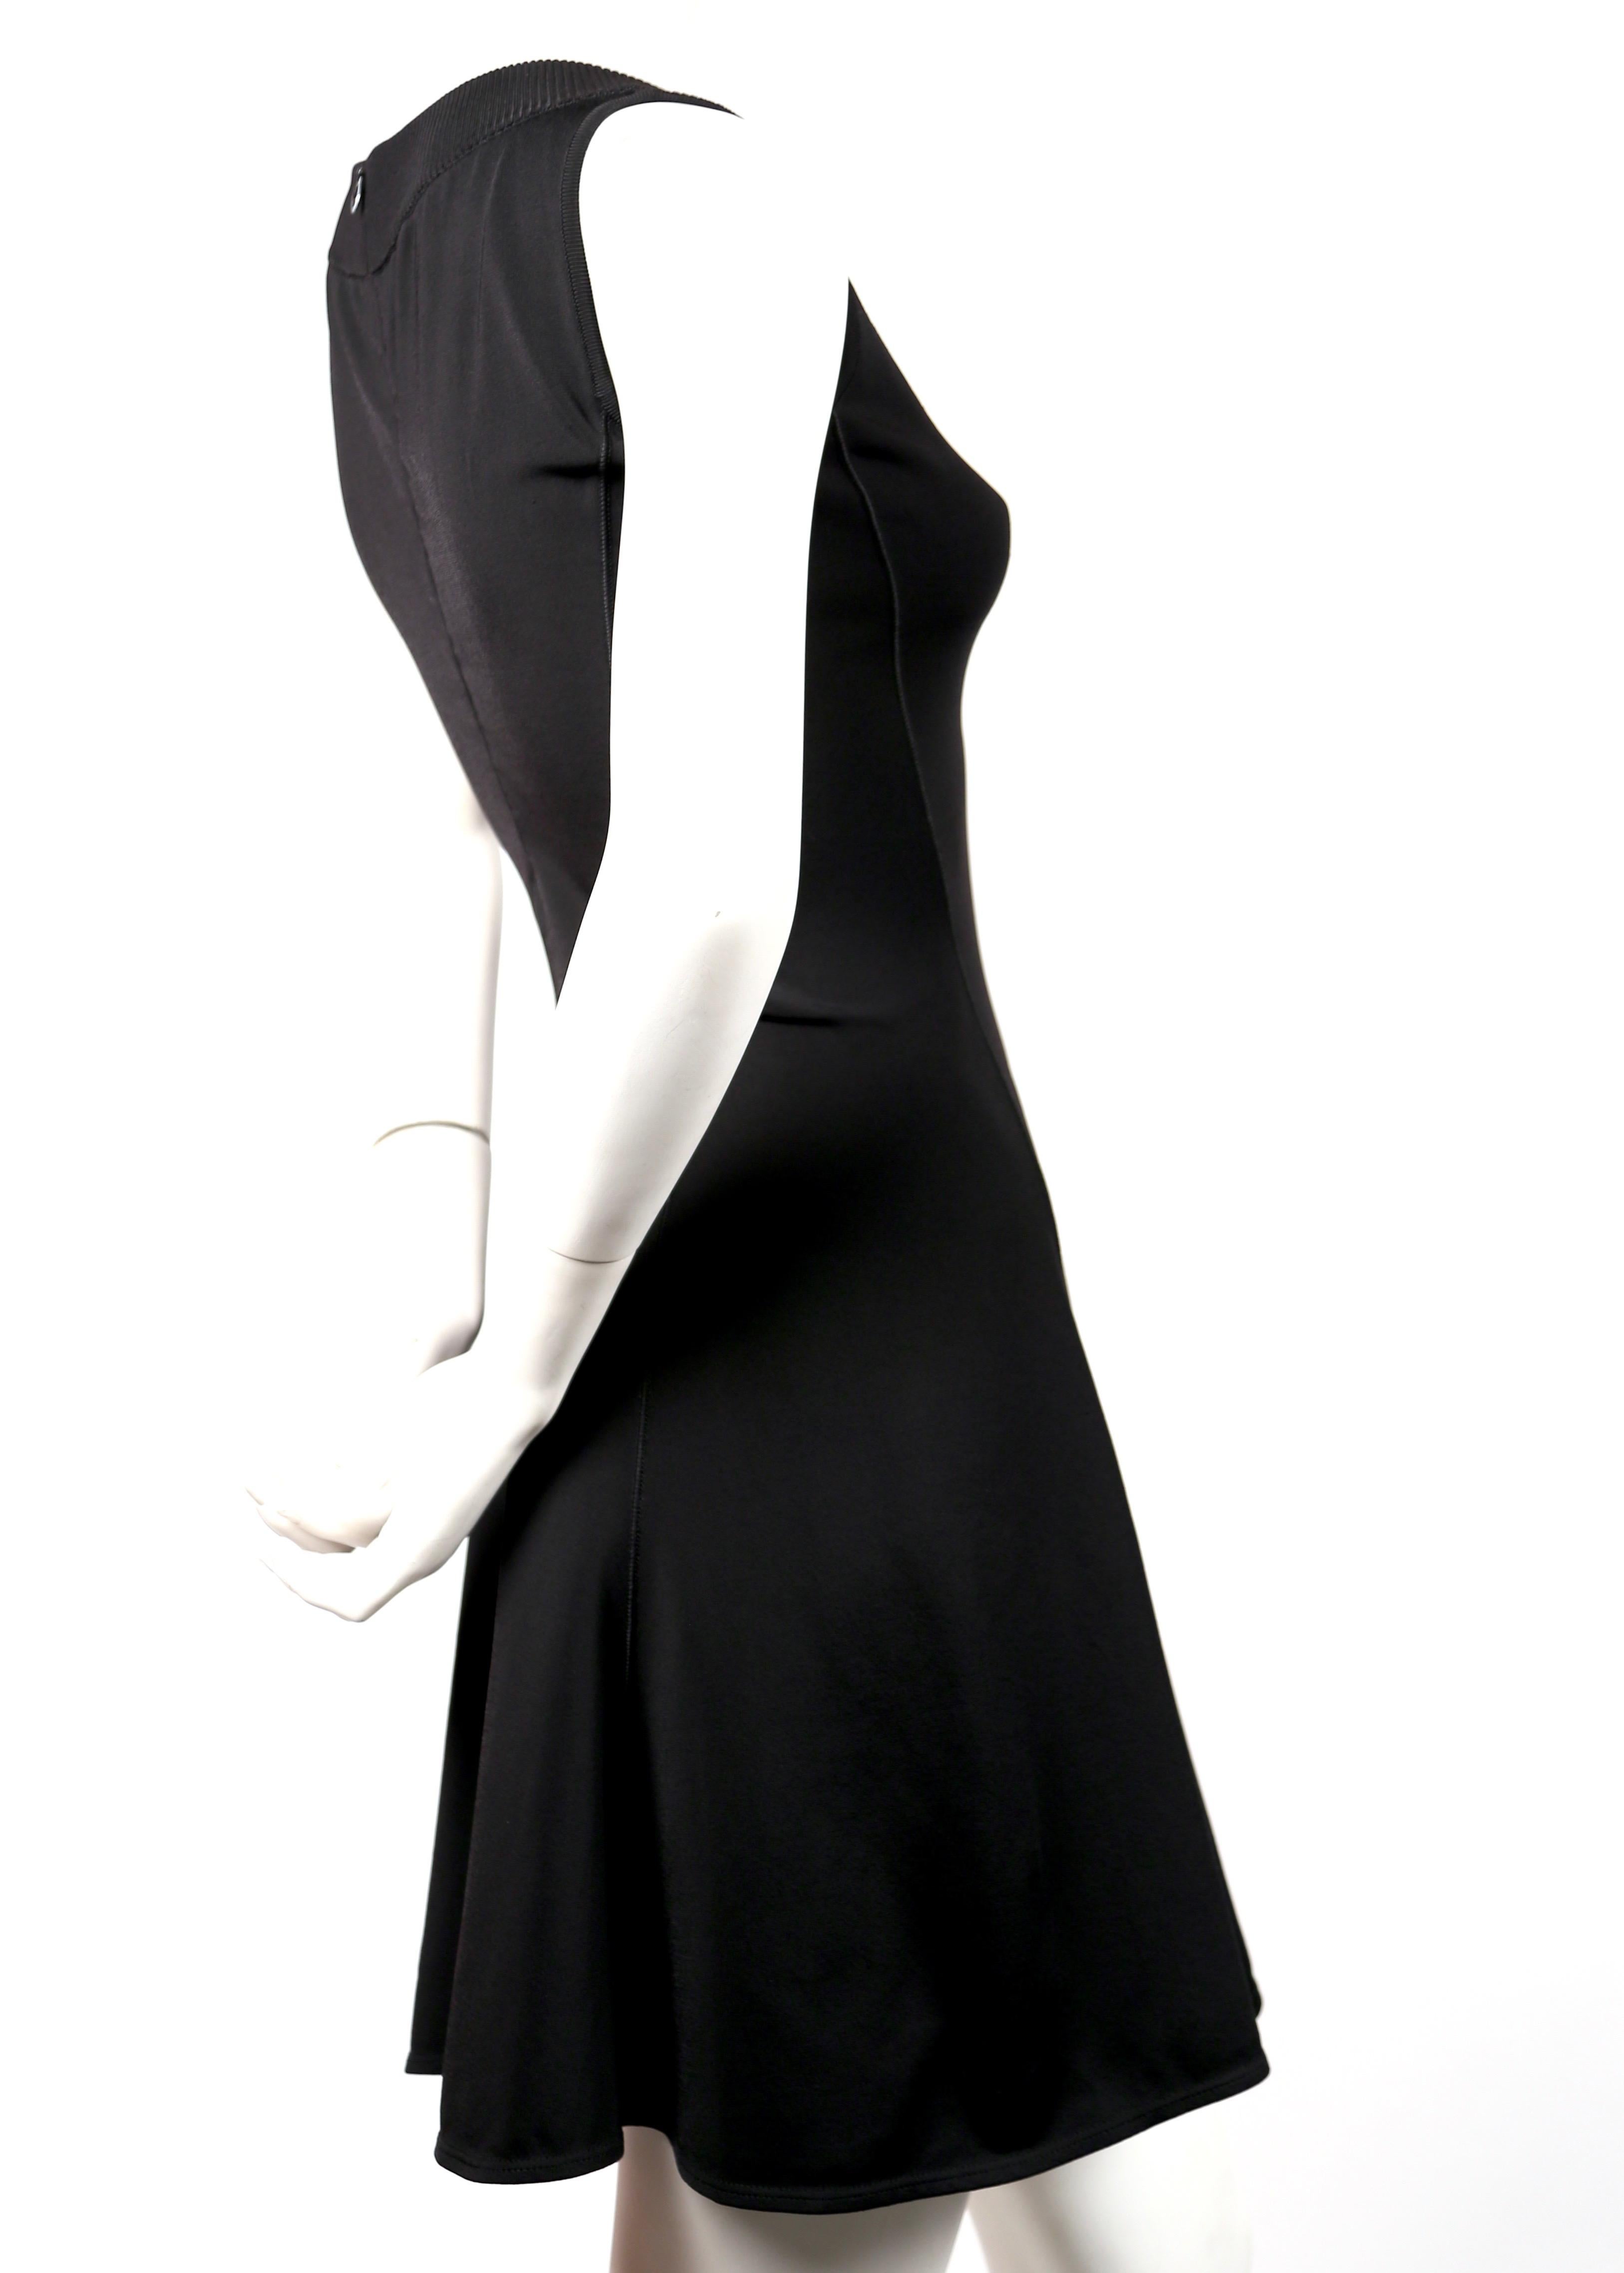 Jet-black, flared, sleeveless dress with V neckline designed by Azzedine Alaia dating to the early 1990's. Size S. Approximate measurements (unstretched): bust 31-32